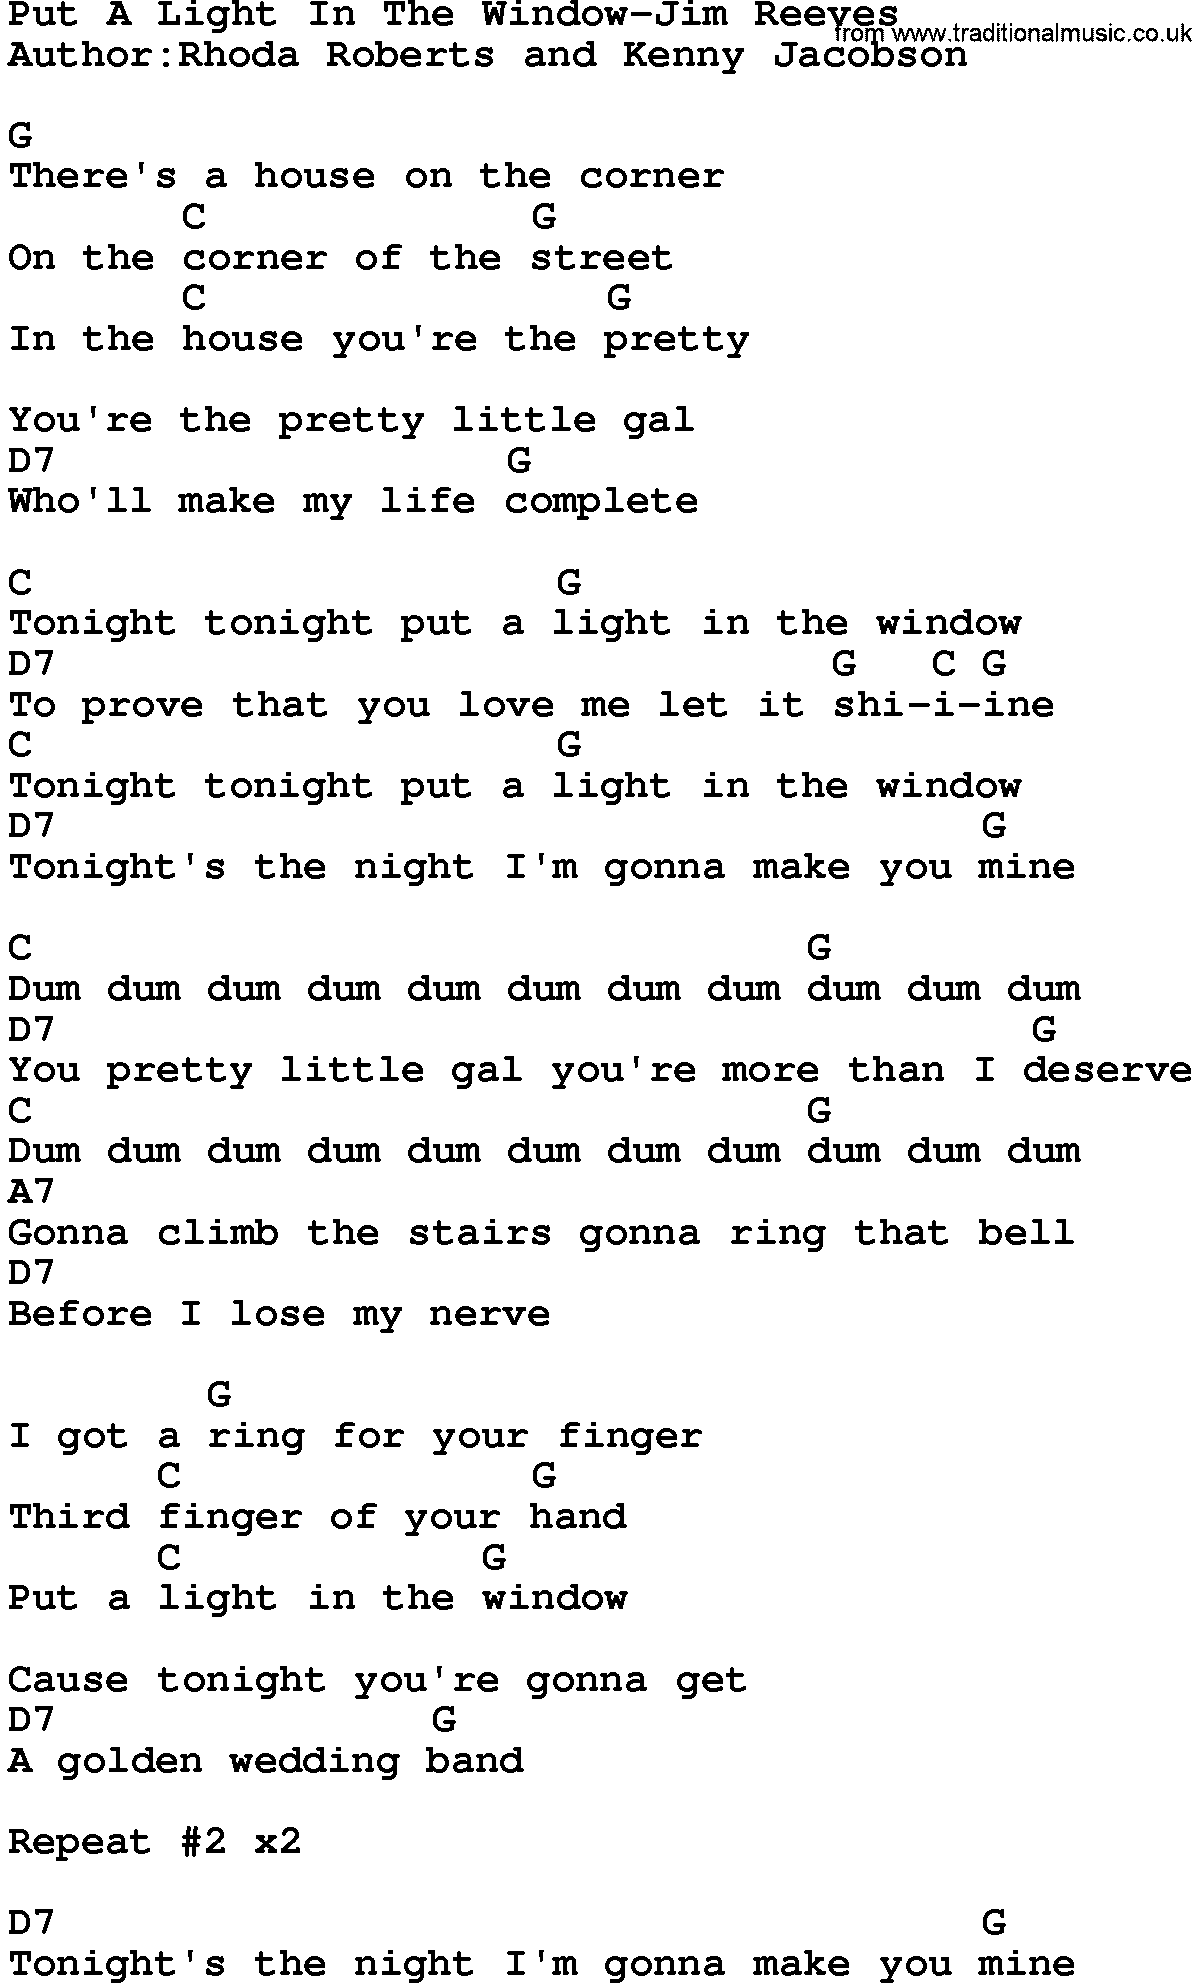 Country music song: Put A Light In The Window-Jim Reeves lyrics and chords